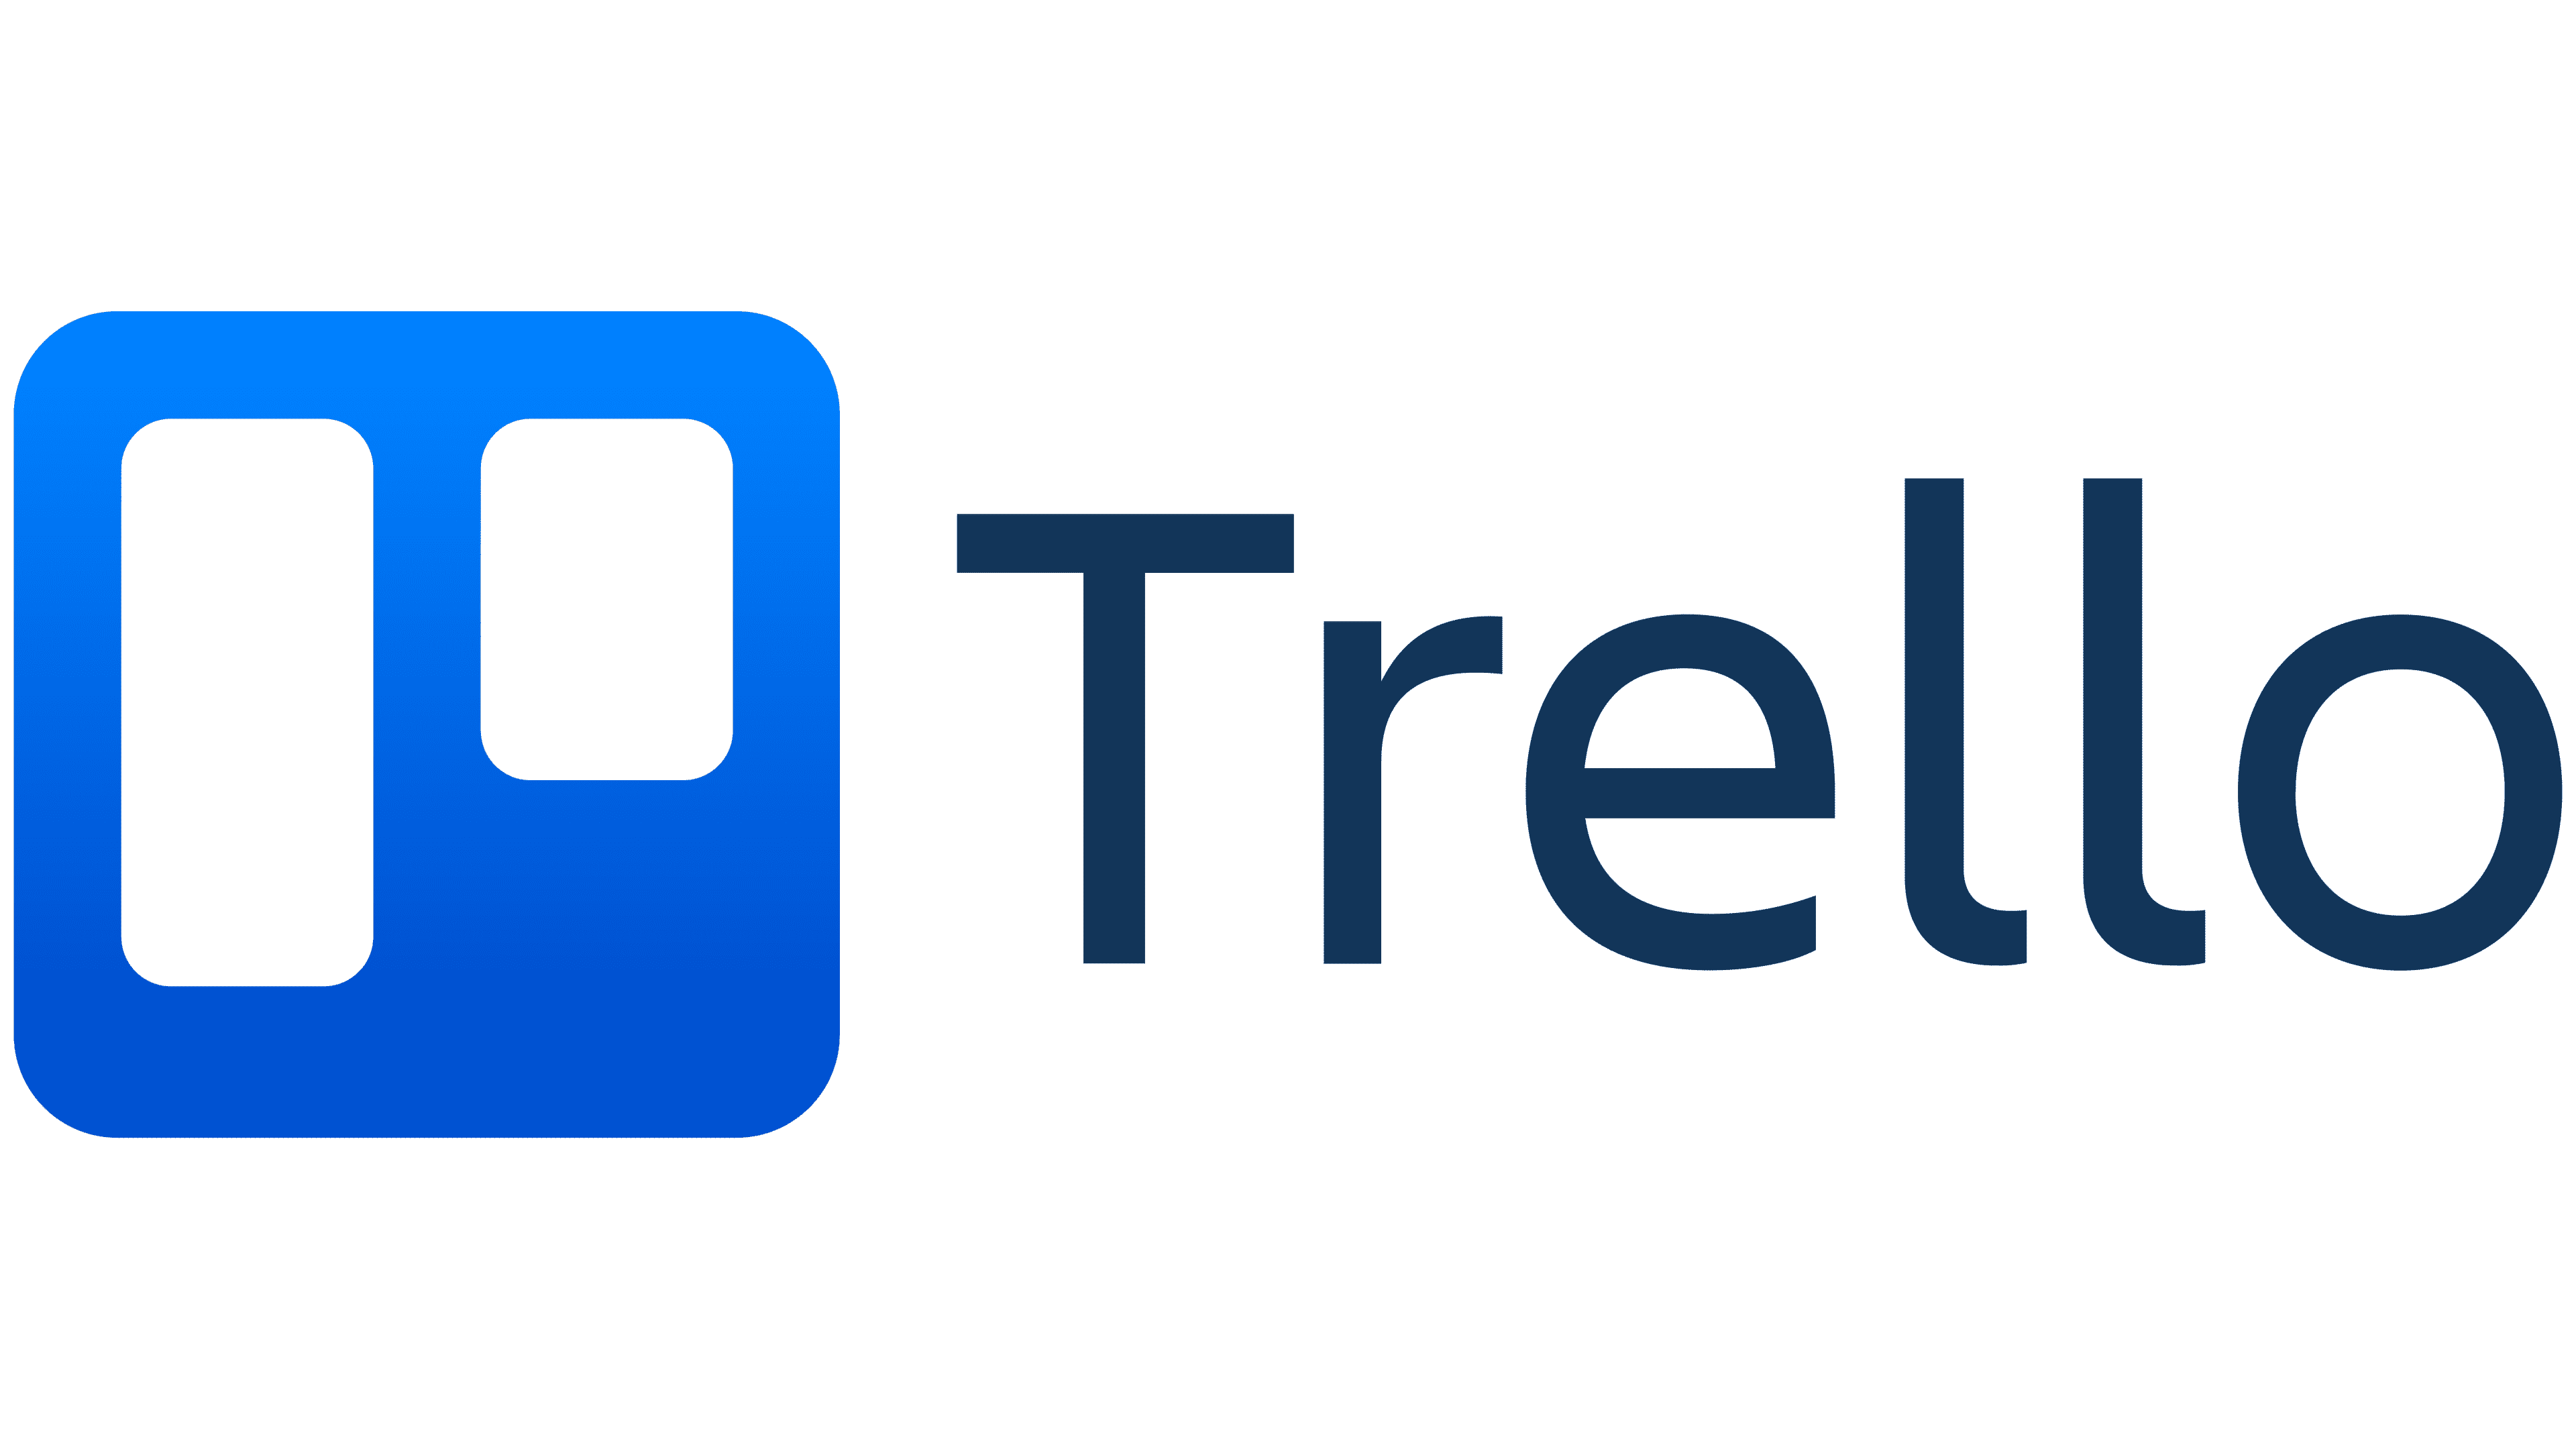 Paramount Consulting offers Trello Project Management Software setup and training for businesses of all sizes.